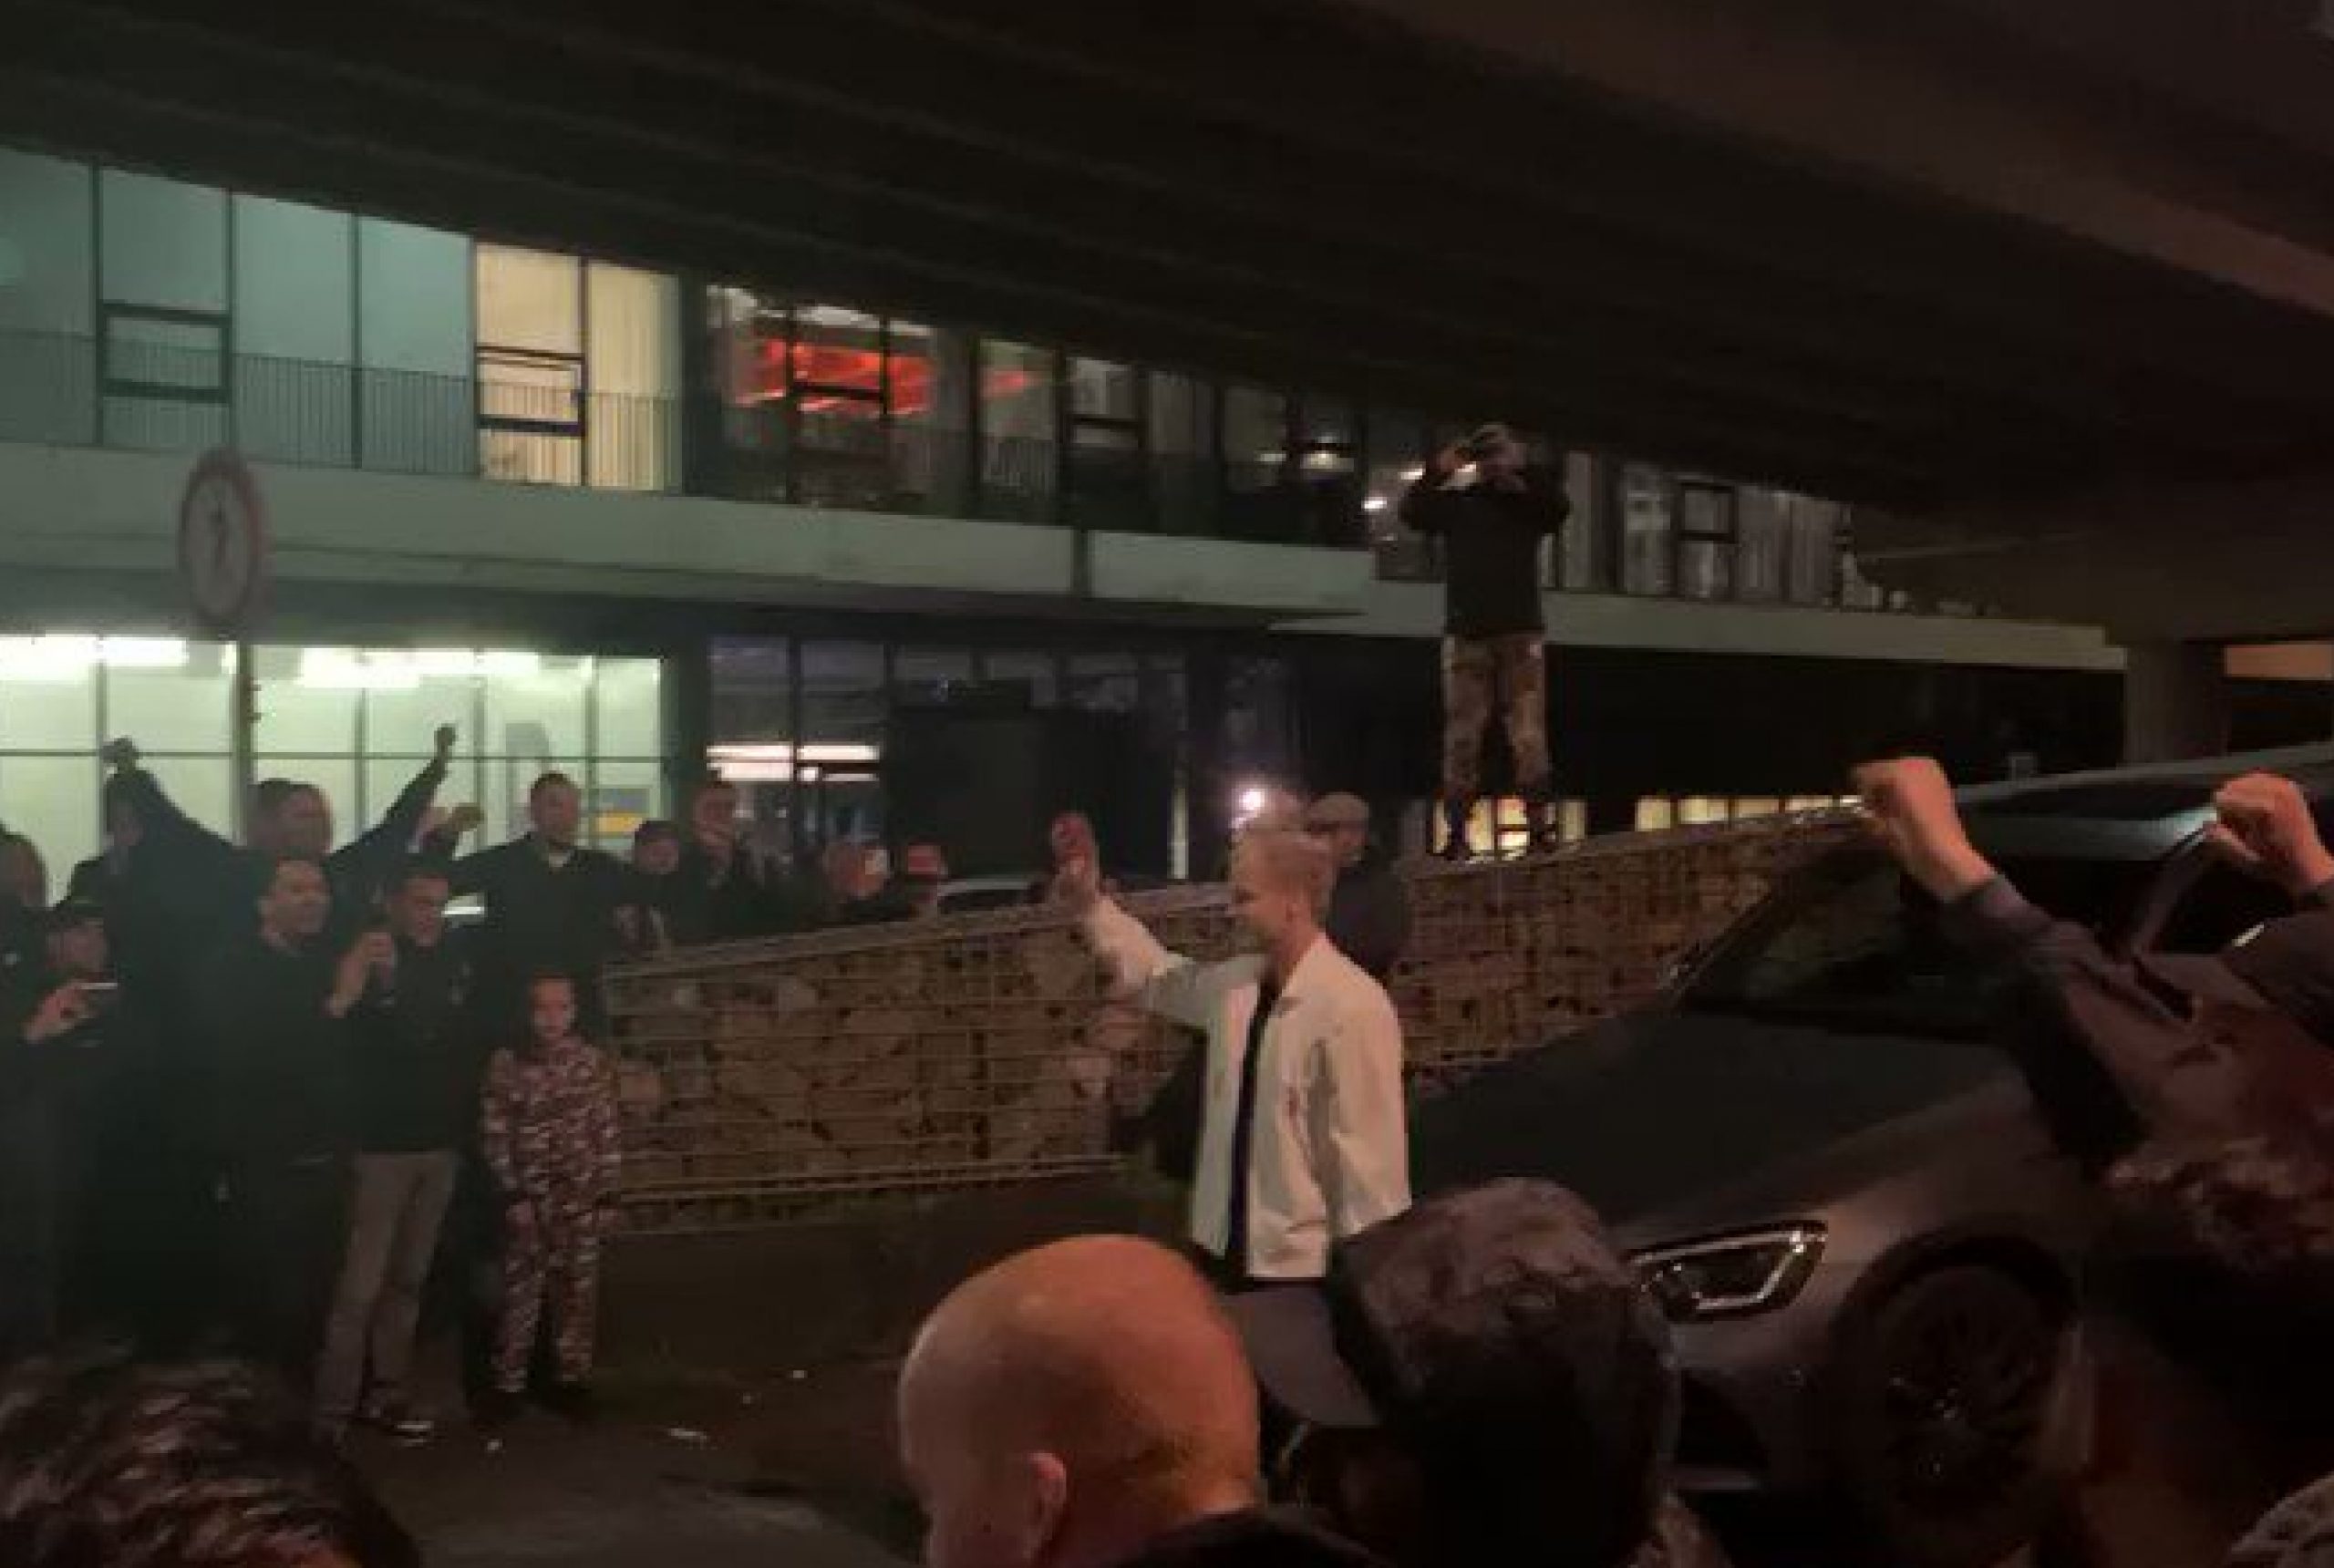 (Video) Donny van de Beek received an incredible farewell from Ajax fans after Holland v Italy